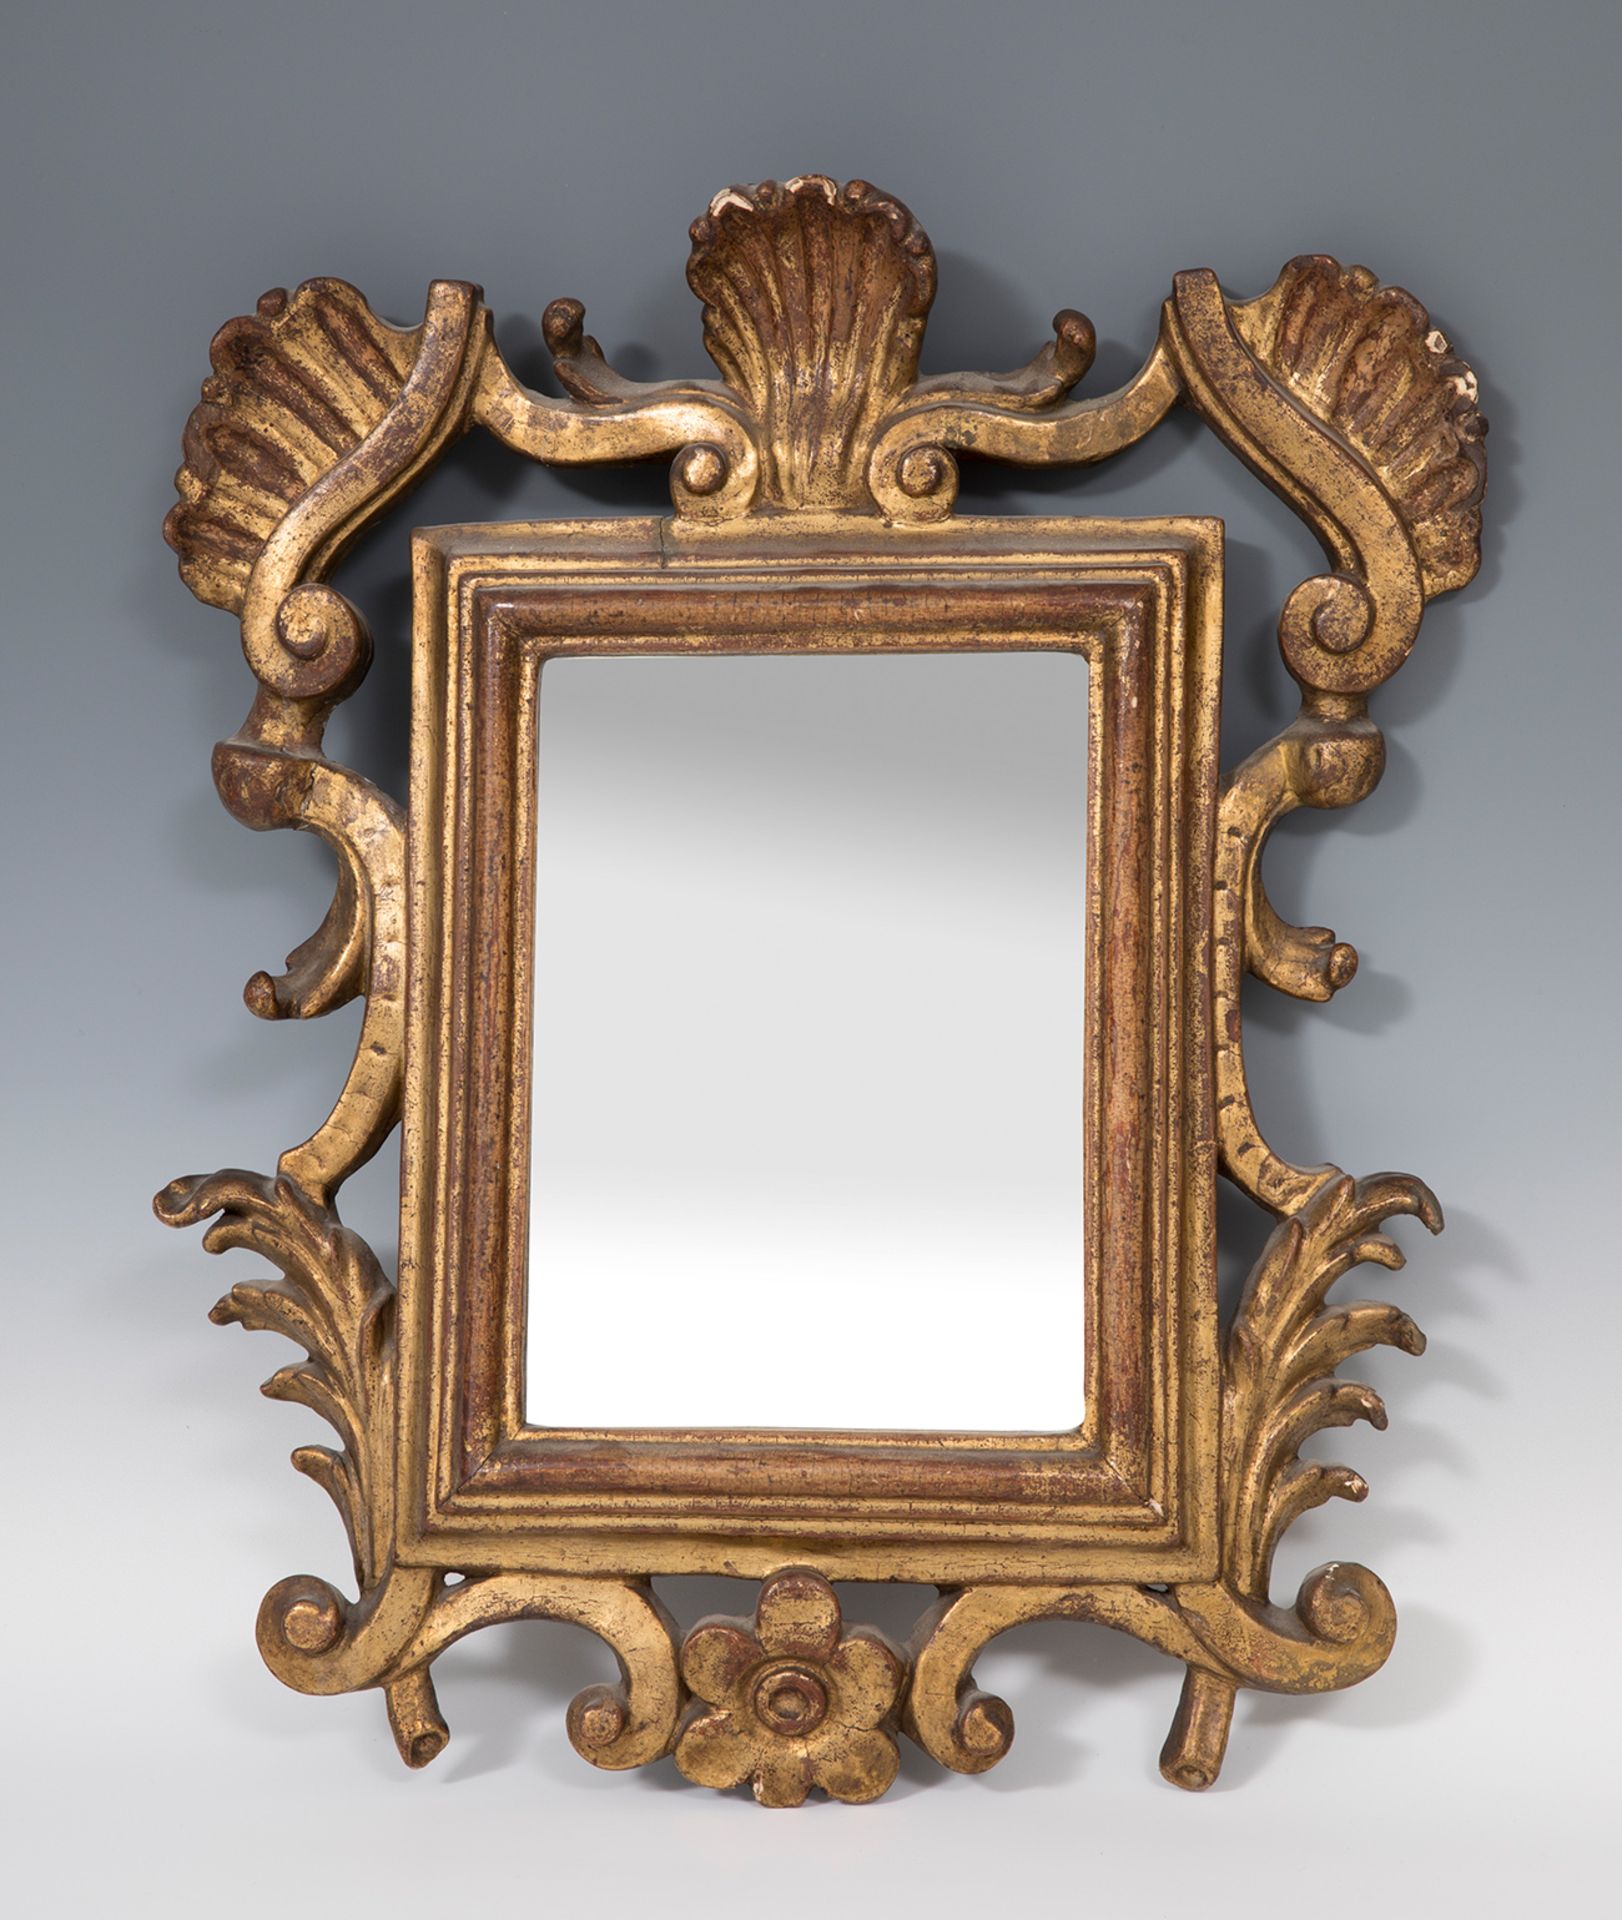 Carlos III cornucopia type mirror. Spain, mid 18th century.Carved and gilded wood.Damaged.